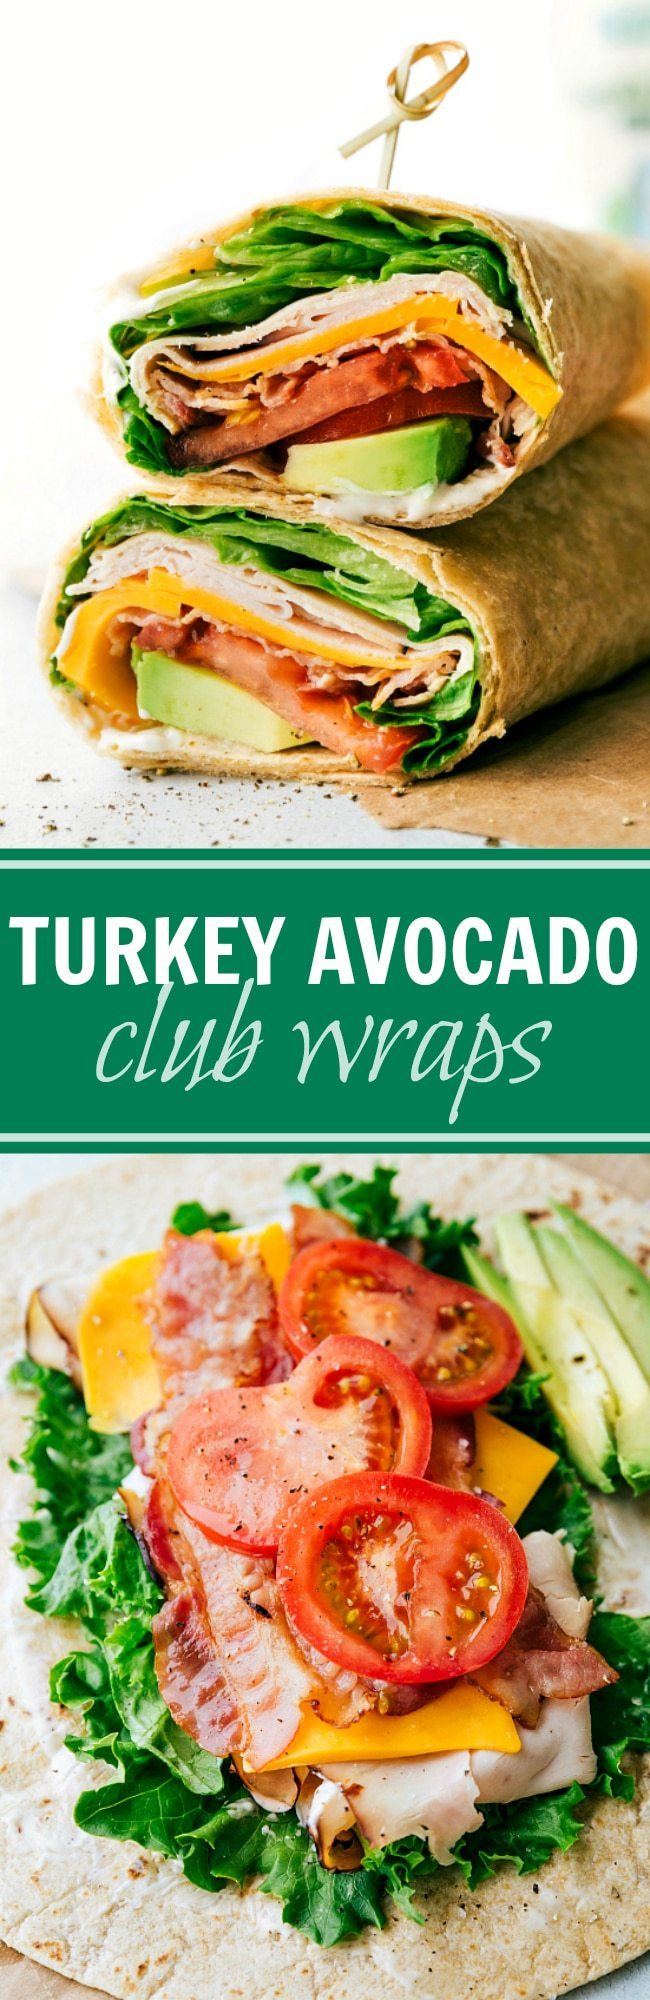 The BEST Turkey Avocado Ranch & Bacon CLUB WRAPS. Easy, healthy, delicious, and ready in under 10 minutes! via chelseasmessyapron.com